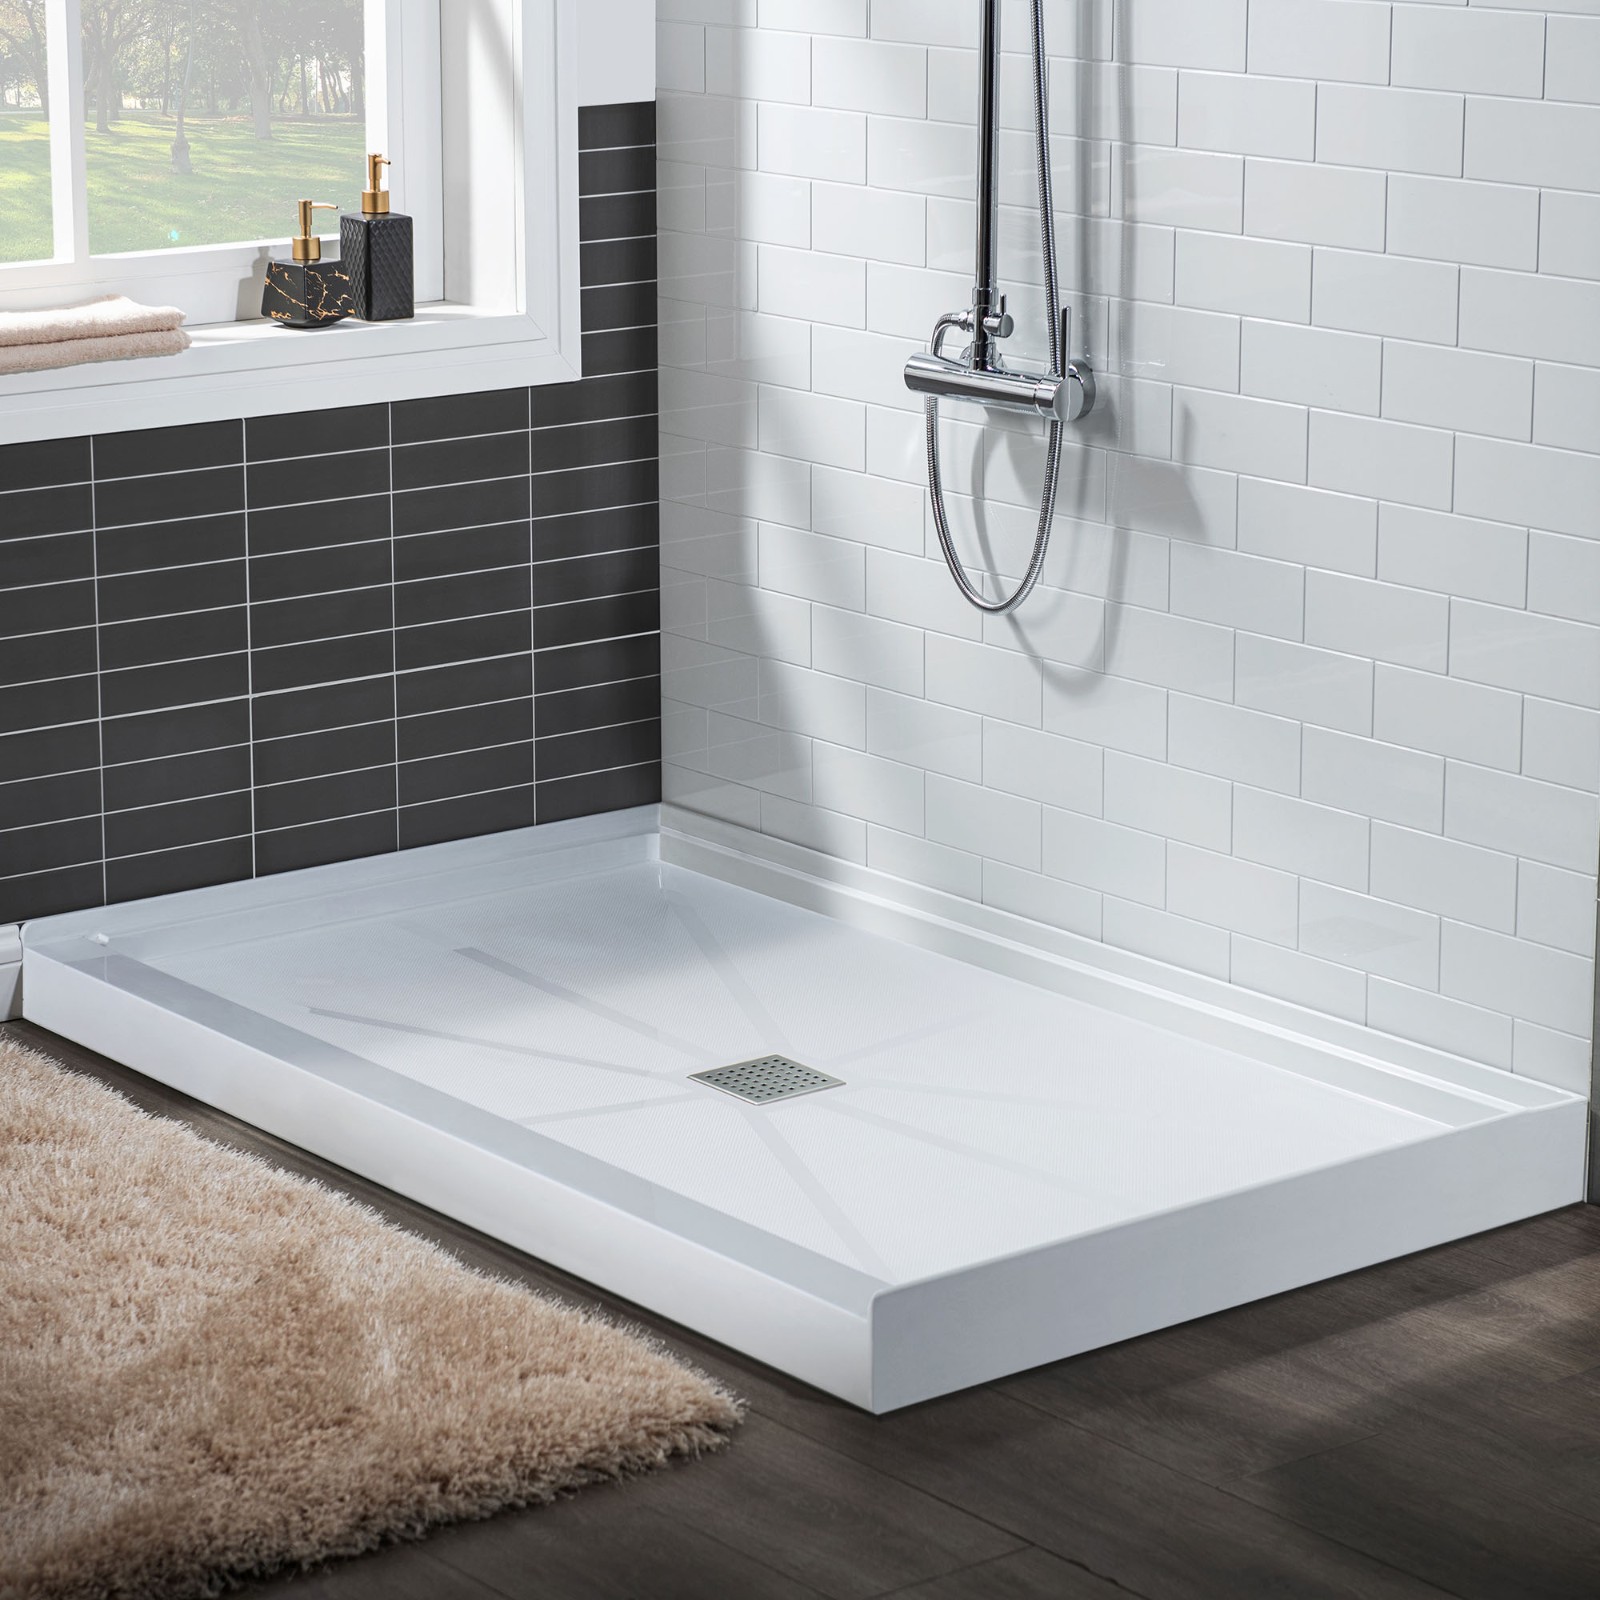  WOODBRIDGE SBR6034-1000C Solid Surface Shower Base with Recessed Trench Side Including Stainless Steel Linear Cover, 60